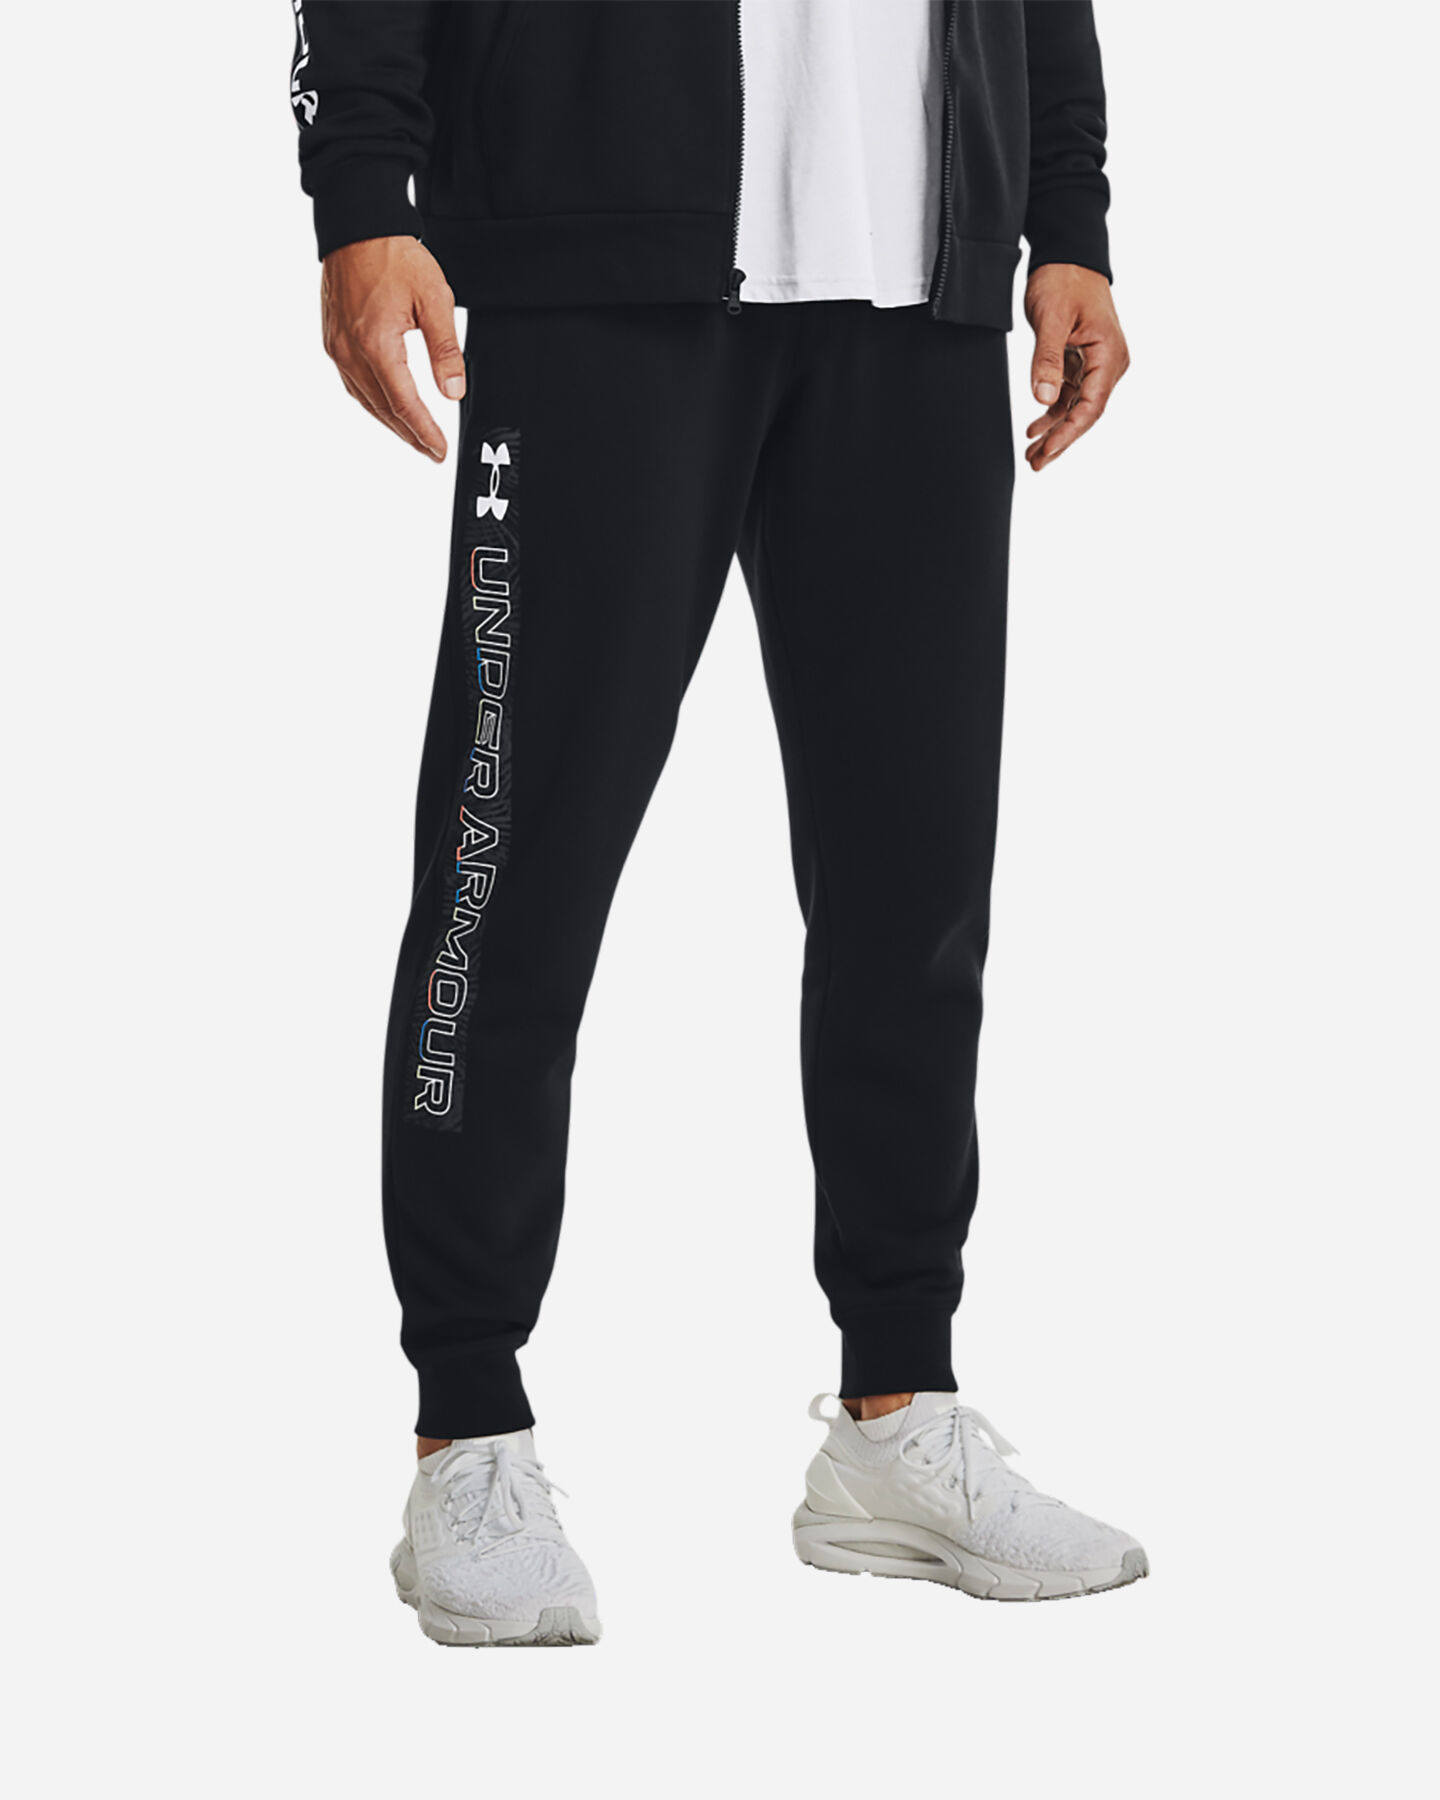  Pantalone UNDER ARMOUR A RIVAL LIGHT LOGO GRAPHIC M S5390471|0001|XS scatto 2